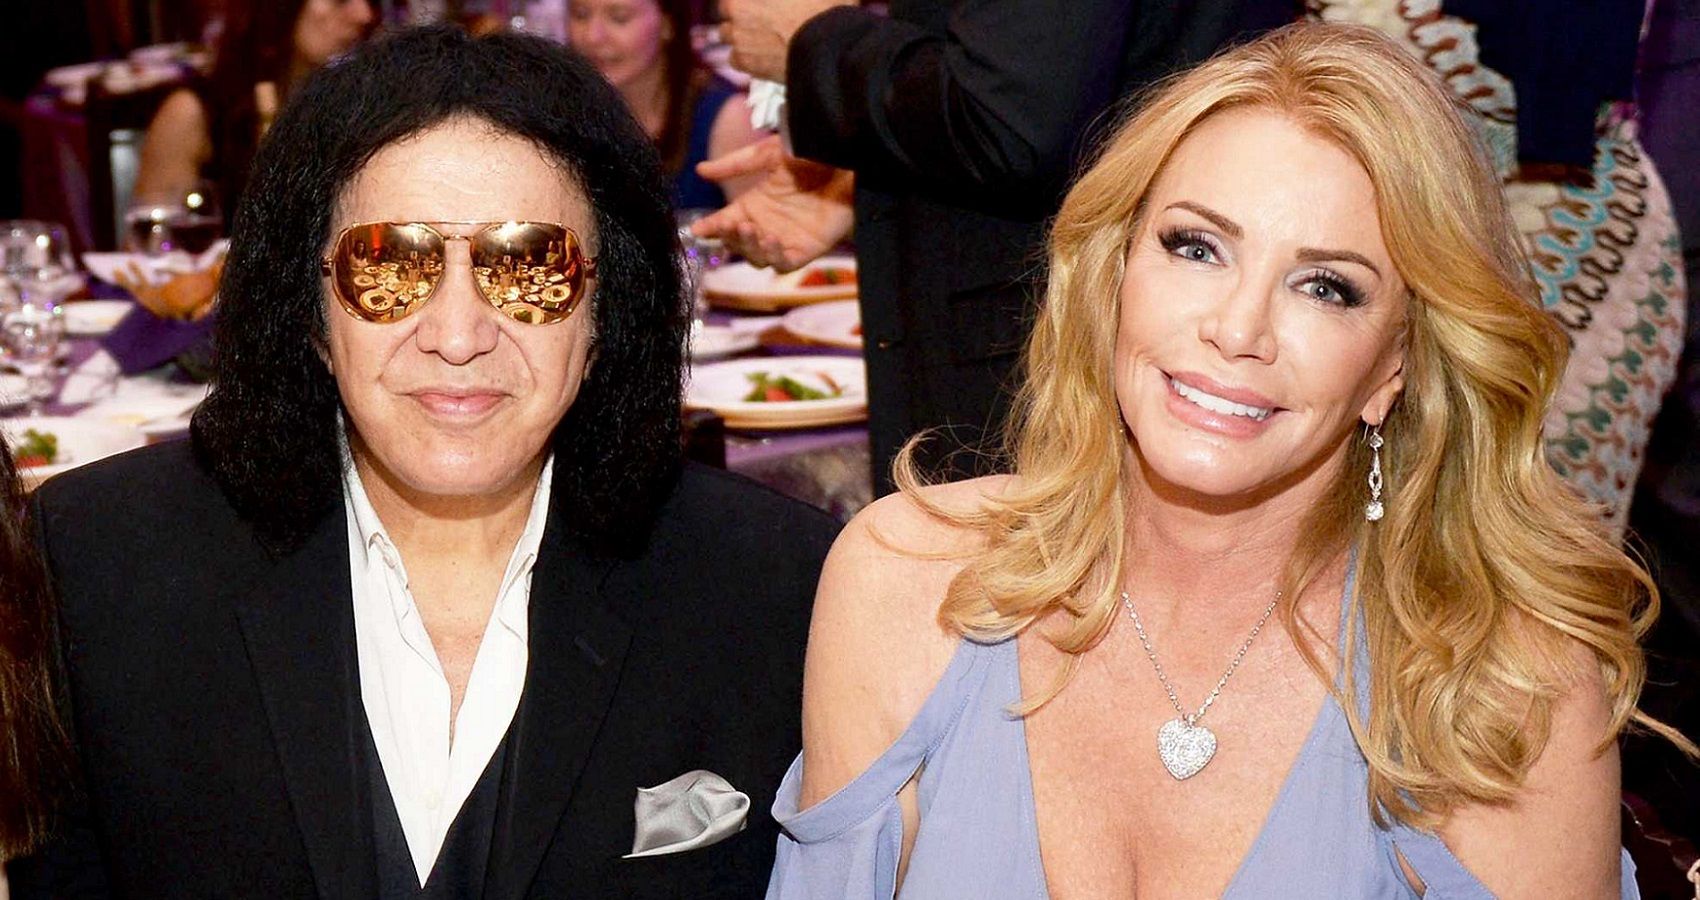 Shannon Tweed and Gene Simmons seated side by side at a table